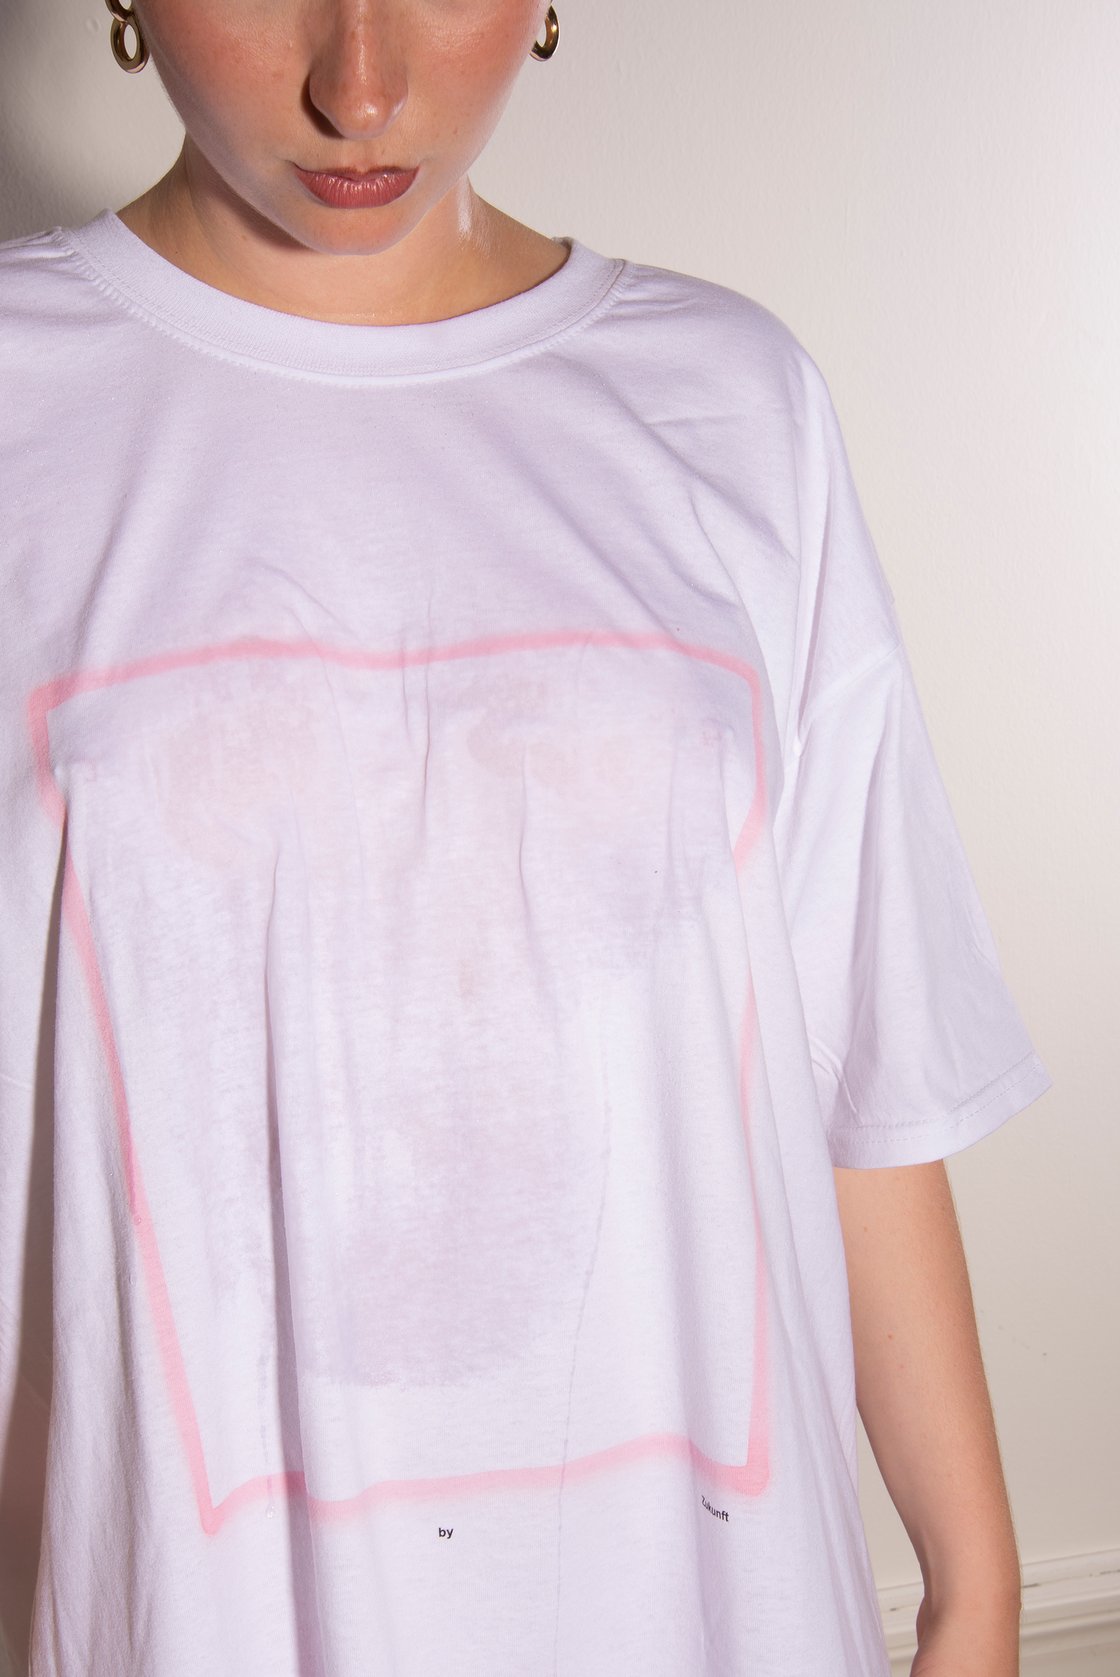 Image of by Zukunft - „a rosy Zukunft“- Airbrush T-Shirt 